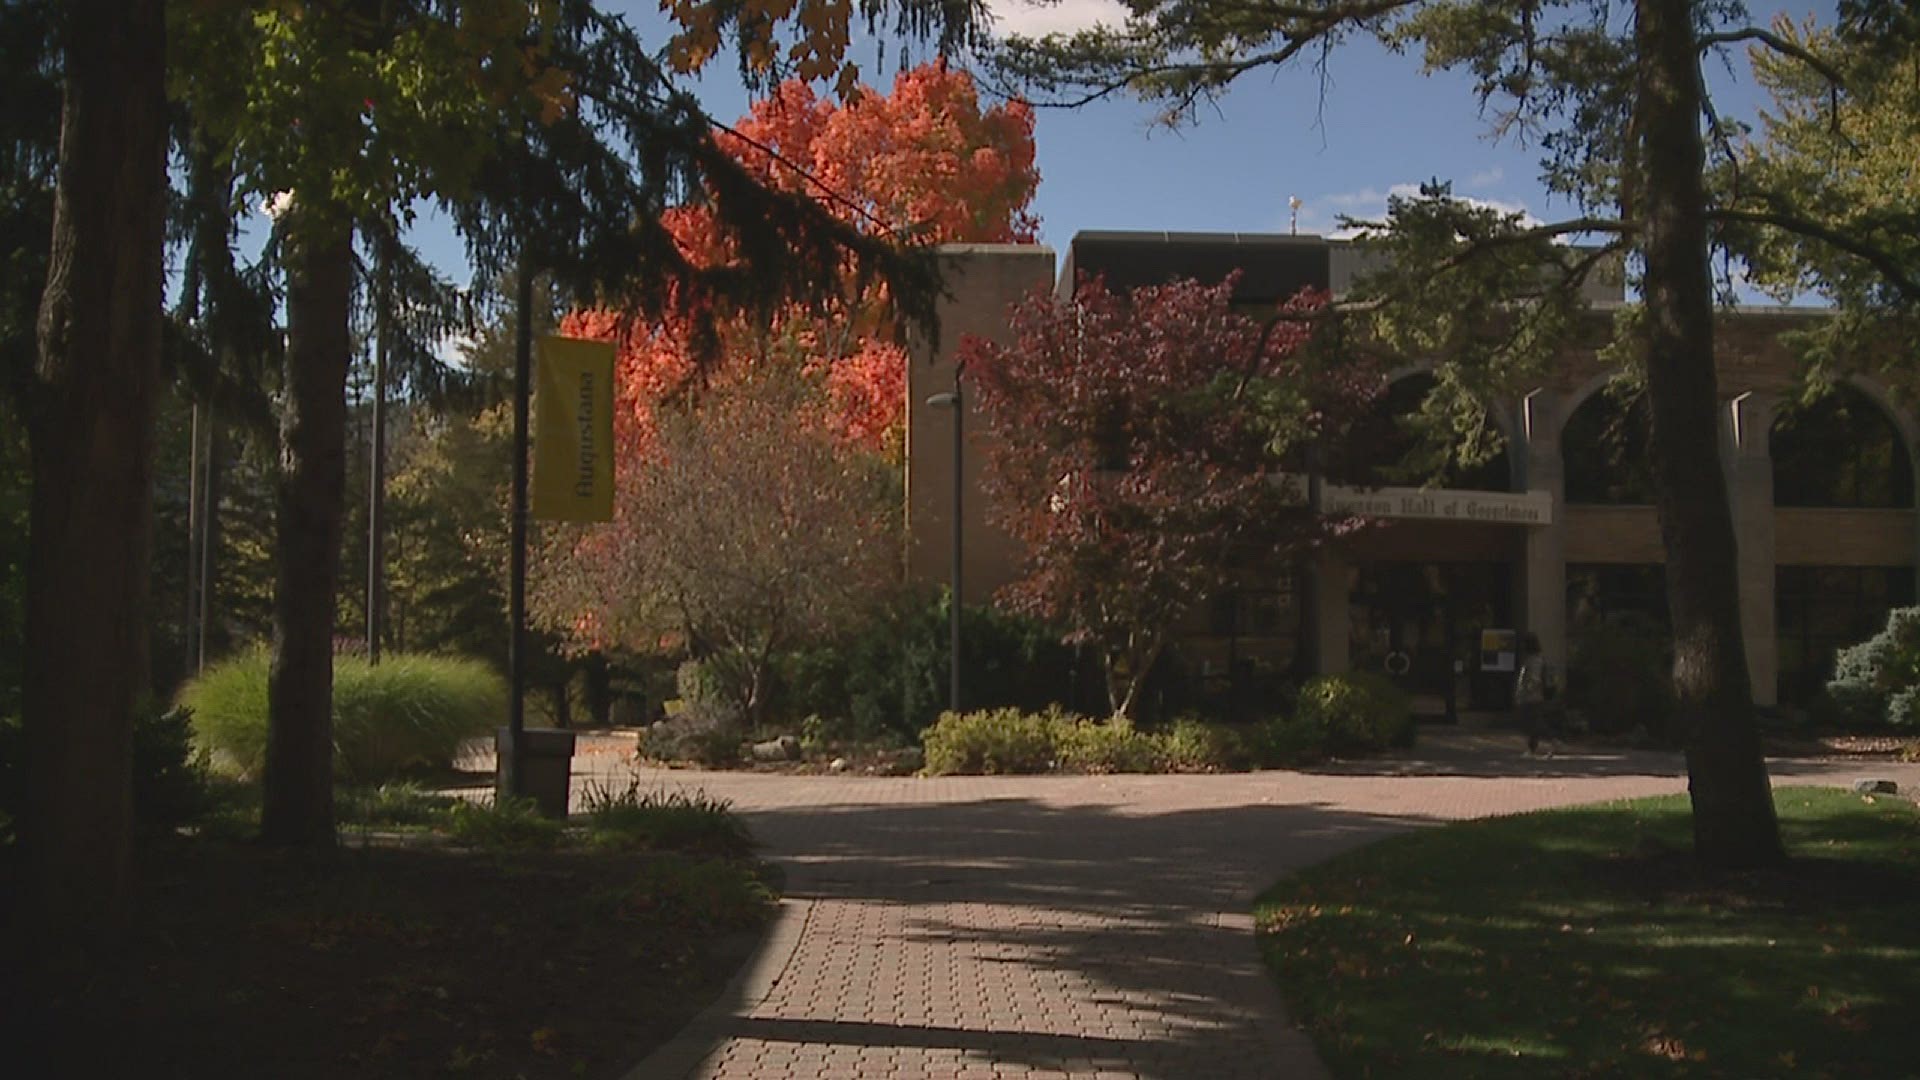 Nestled in a forest on the Mississippi Bluffs in Rock Island, Augustana College's scenic campus is a major selling point. Now, limited campus visits are back.